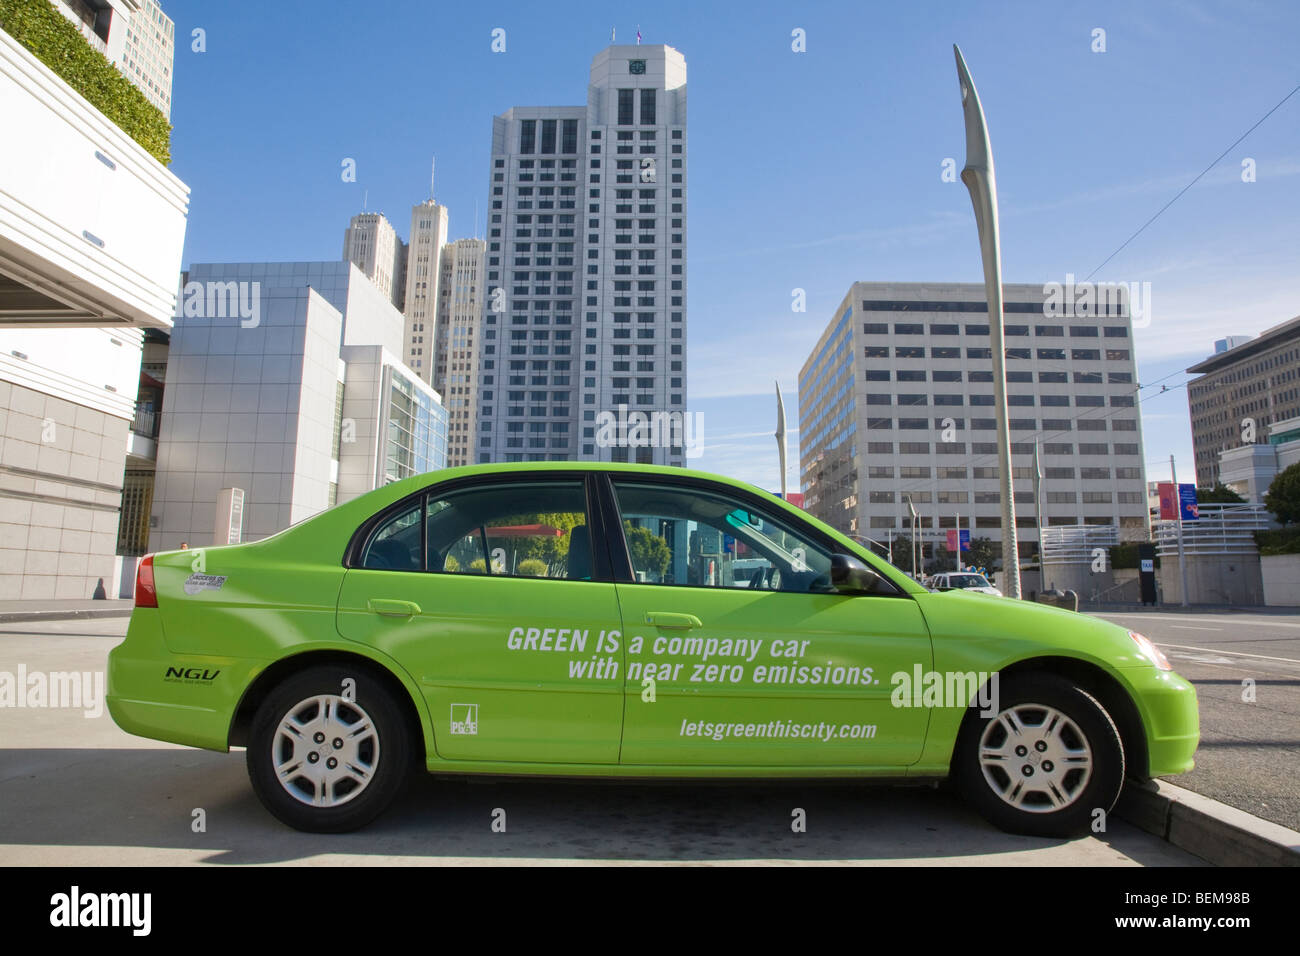 Green Honda natural gas vehicle (NGV) parked at Moscone Center in San Francisco during the Carbon Forum America event in 2008. Stock Photo